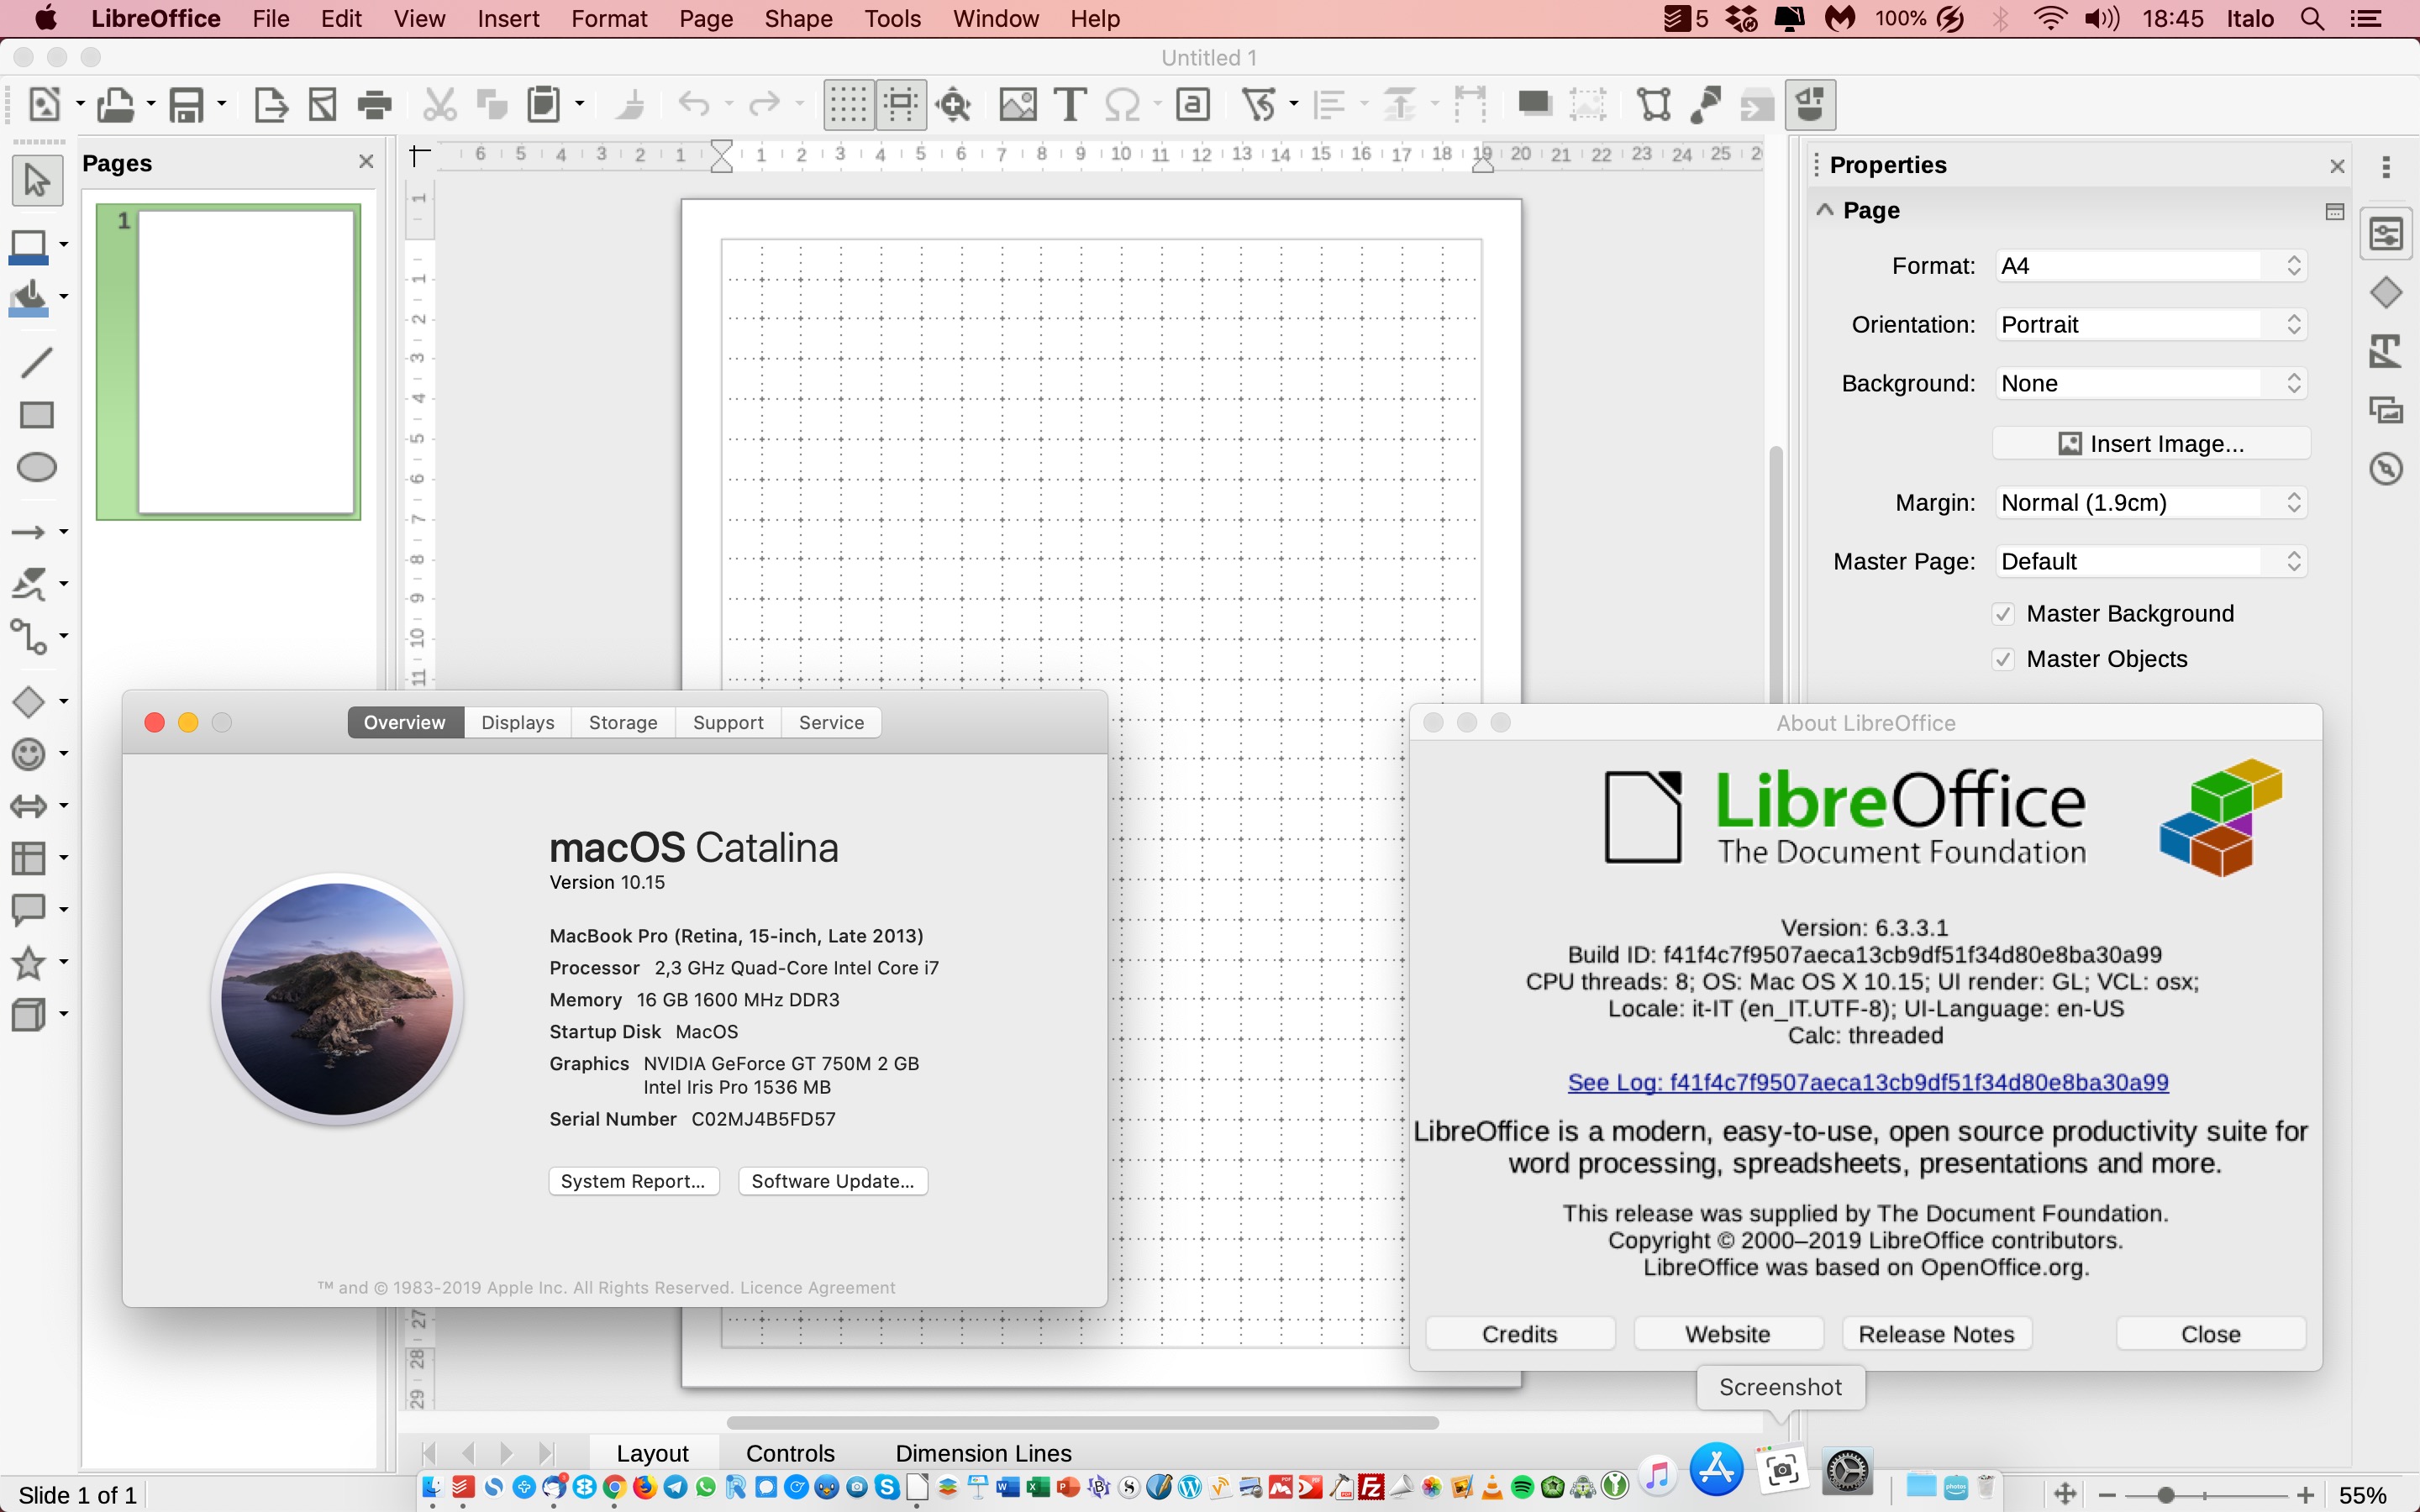 openoffice for macos